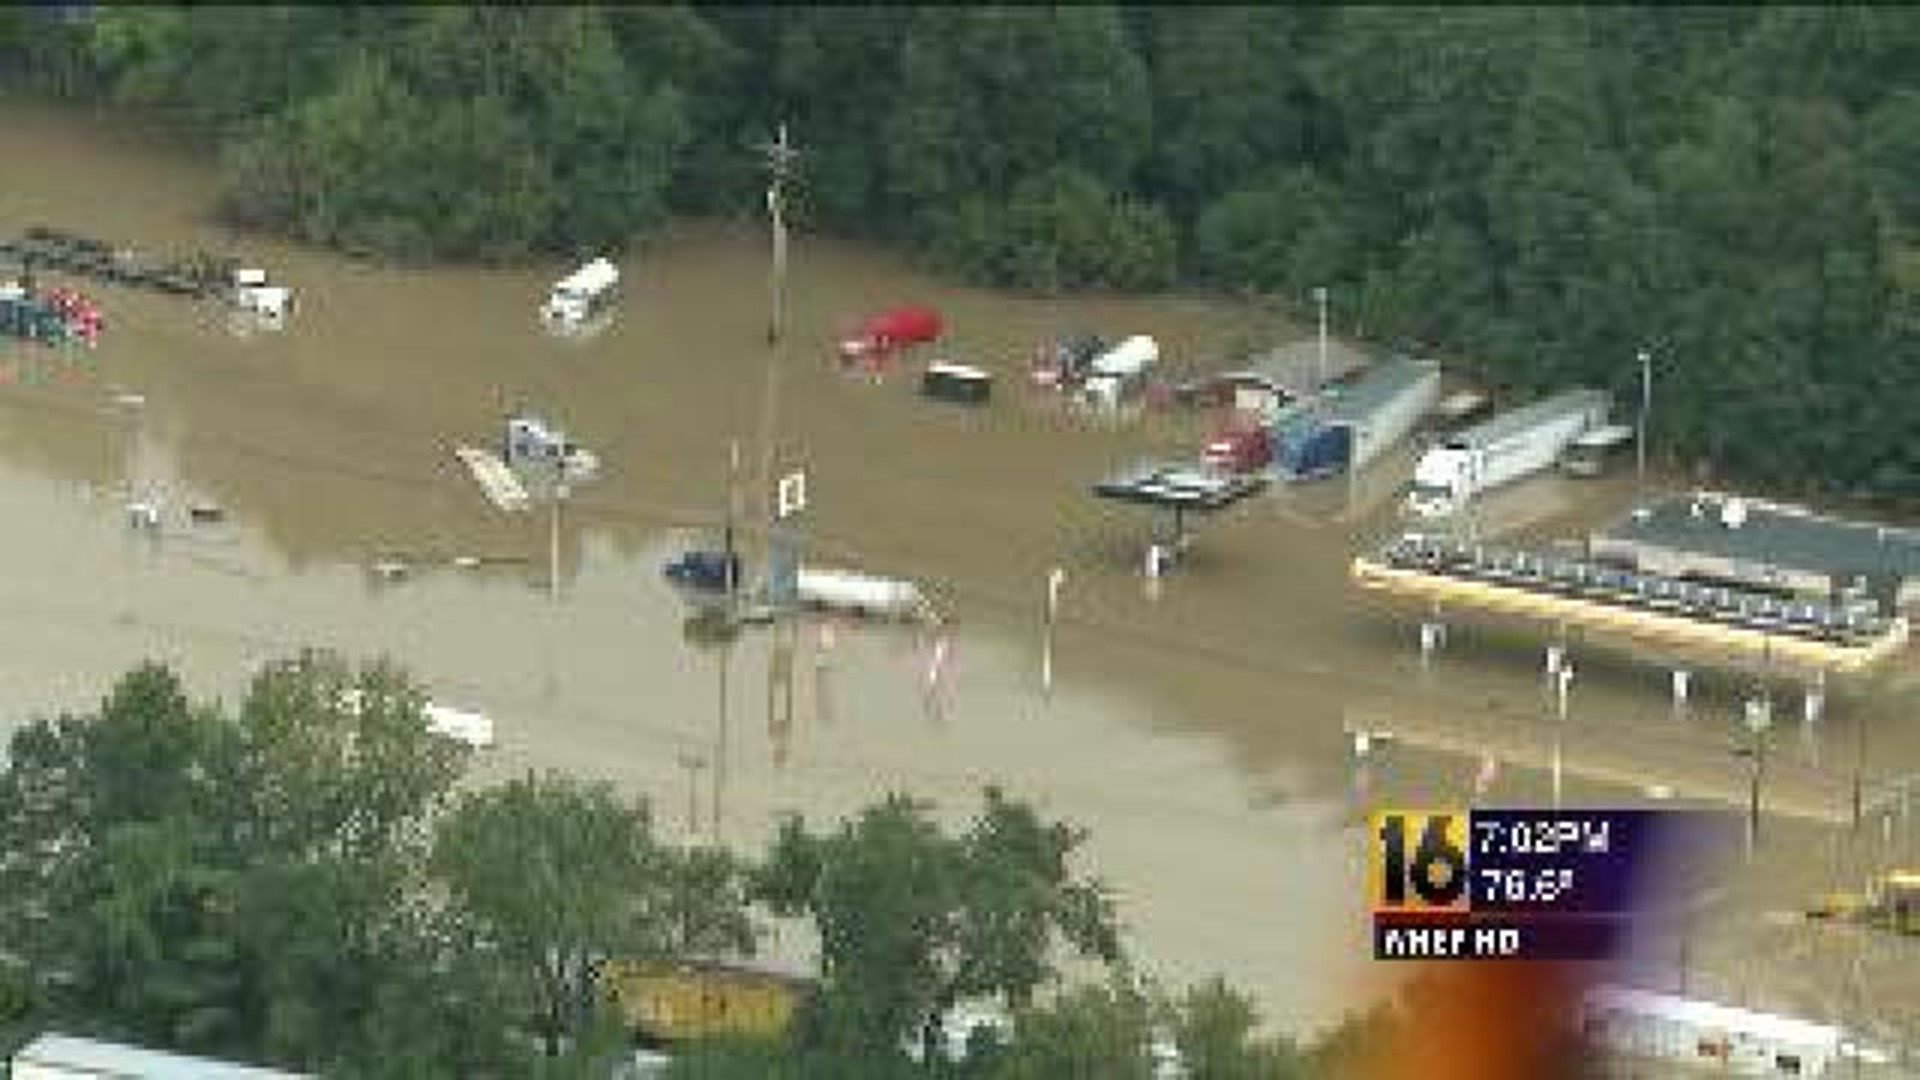 Wyalusing Township Businesses Look Back on 2011 Flood